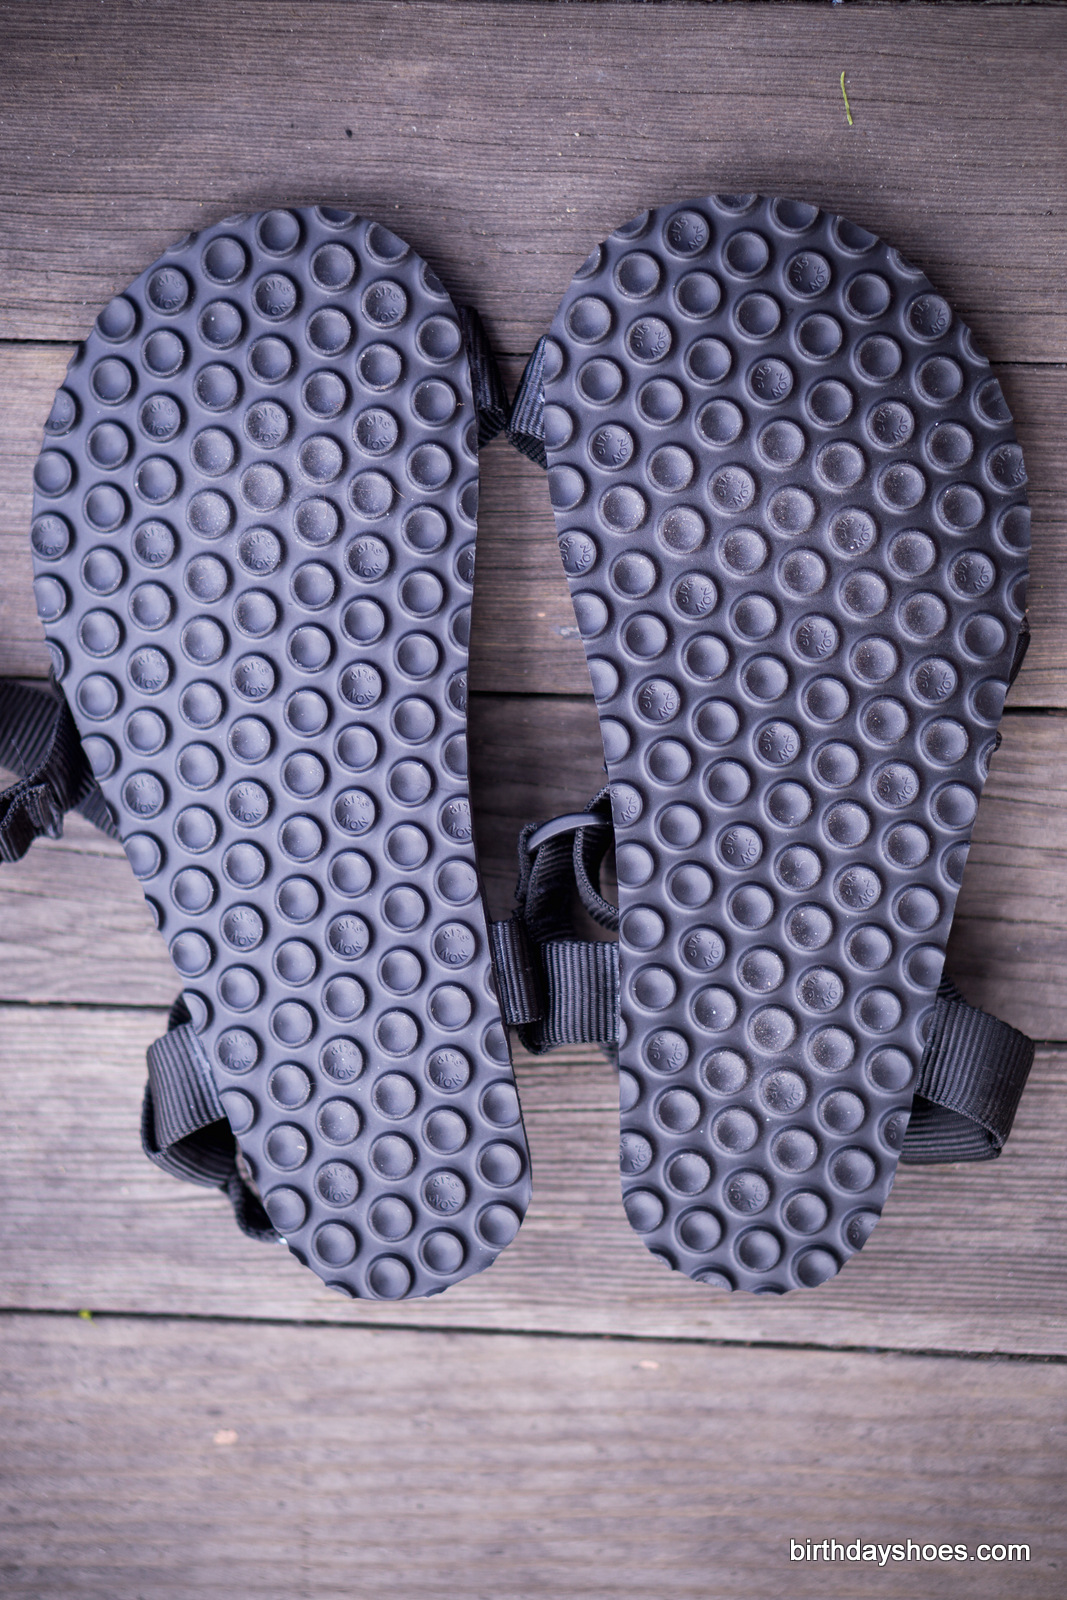 The 6mm Suction Cup Sole. Excellent for trails, rocks, mud, anything!